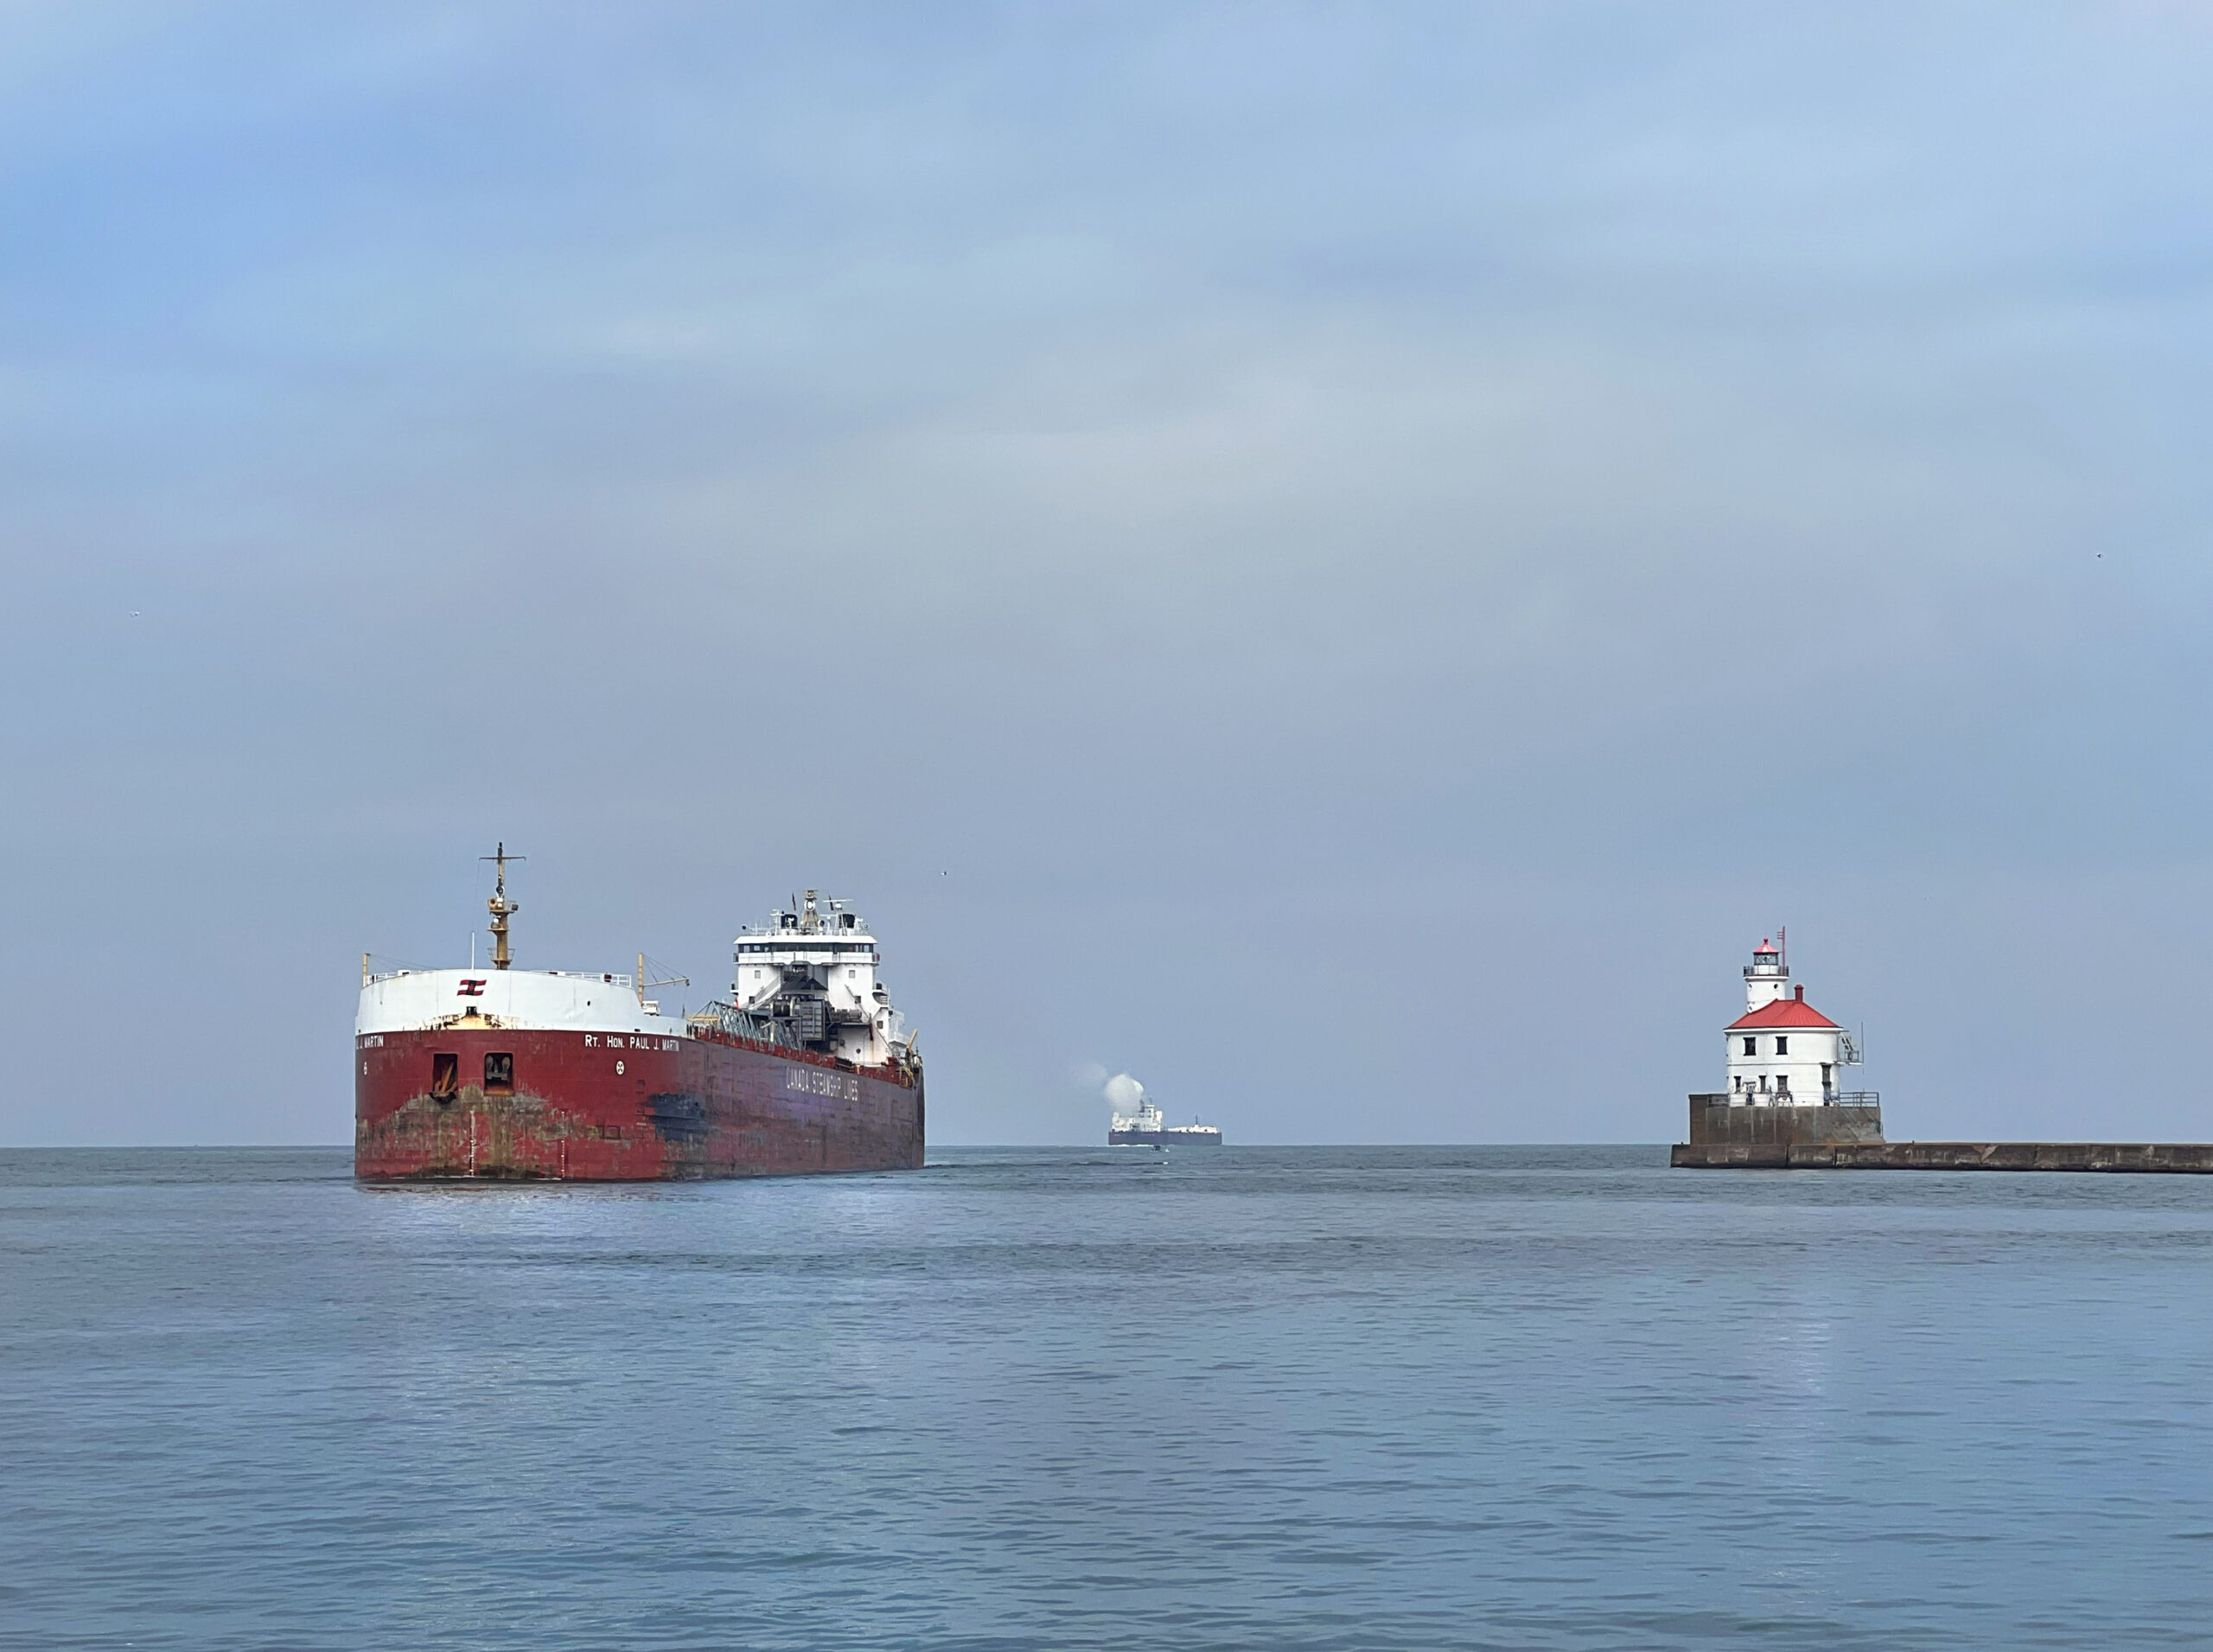 A large ship moving through the canal at Wisconsin Point with a lighthouse in the background.